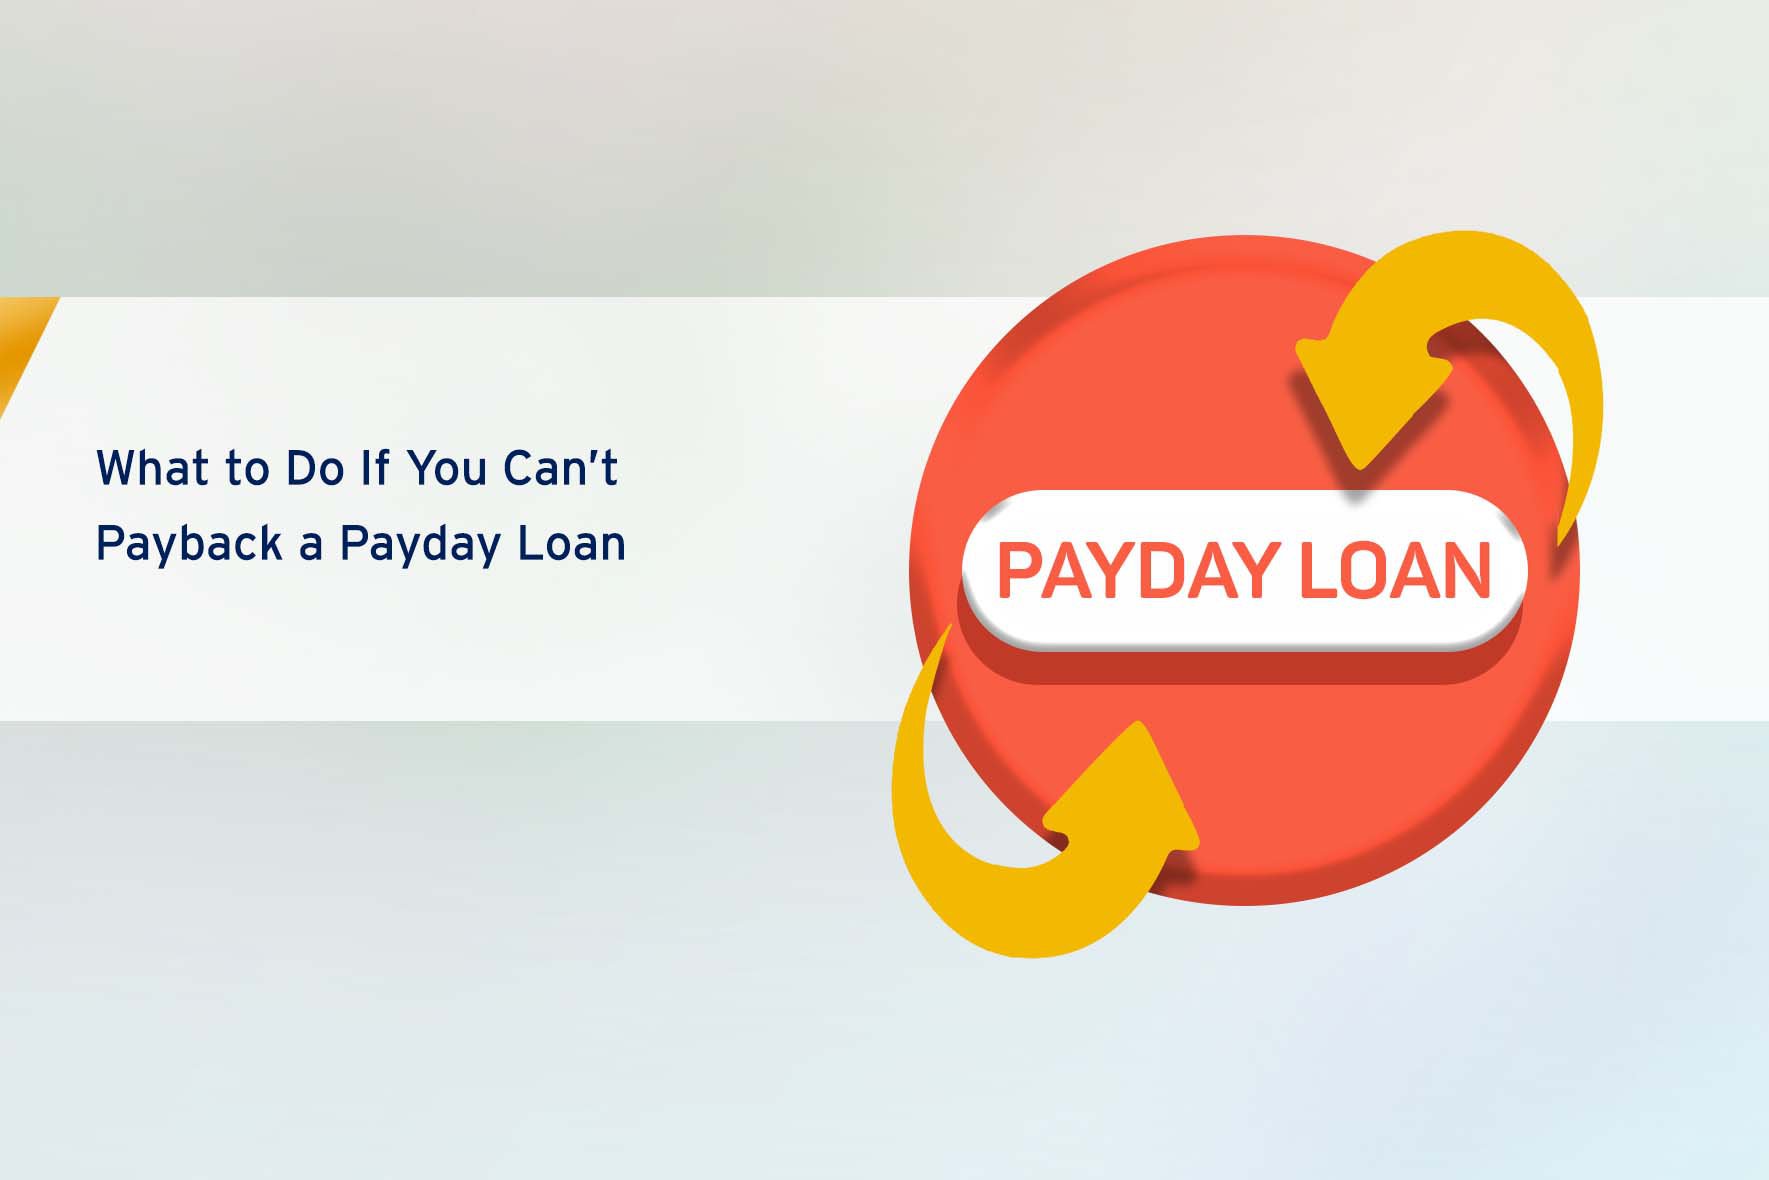 What to Do If You Can’t Pay Back a Payday Loan